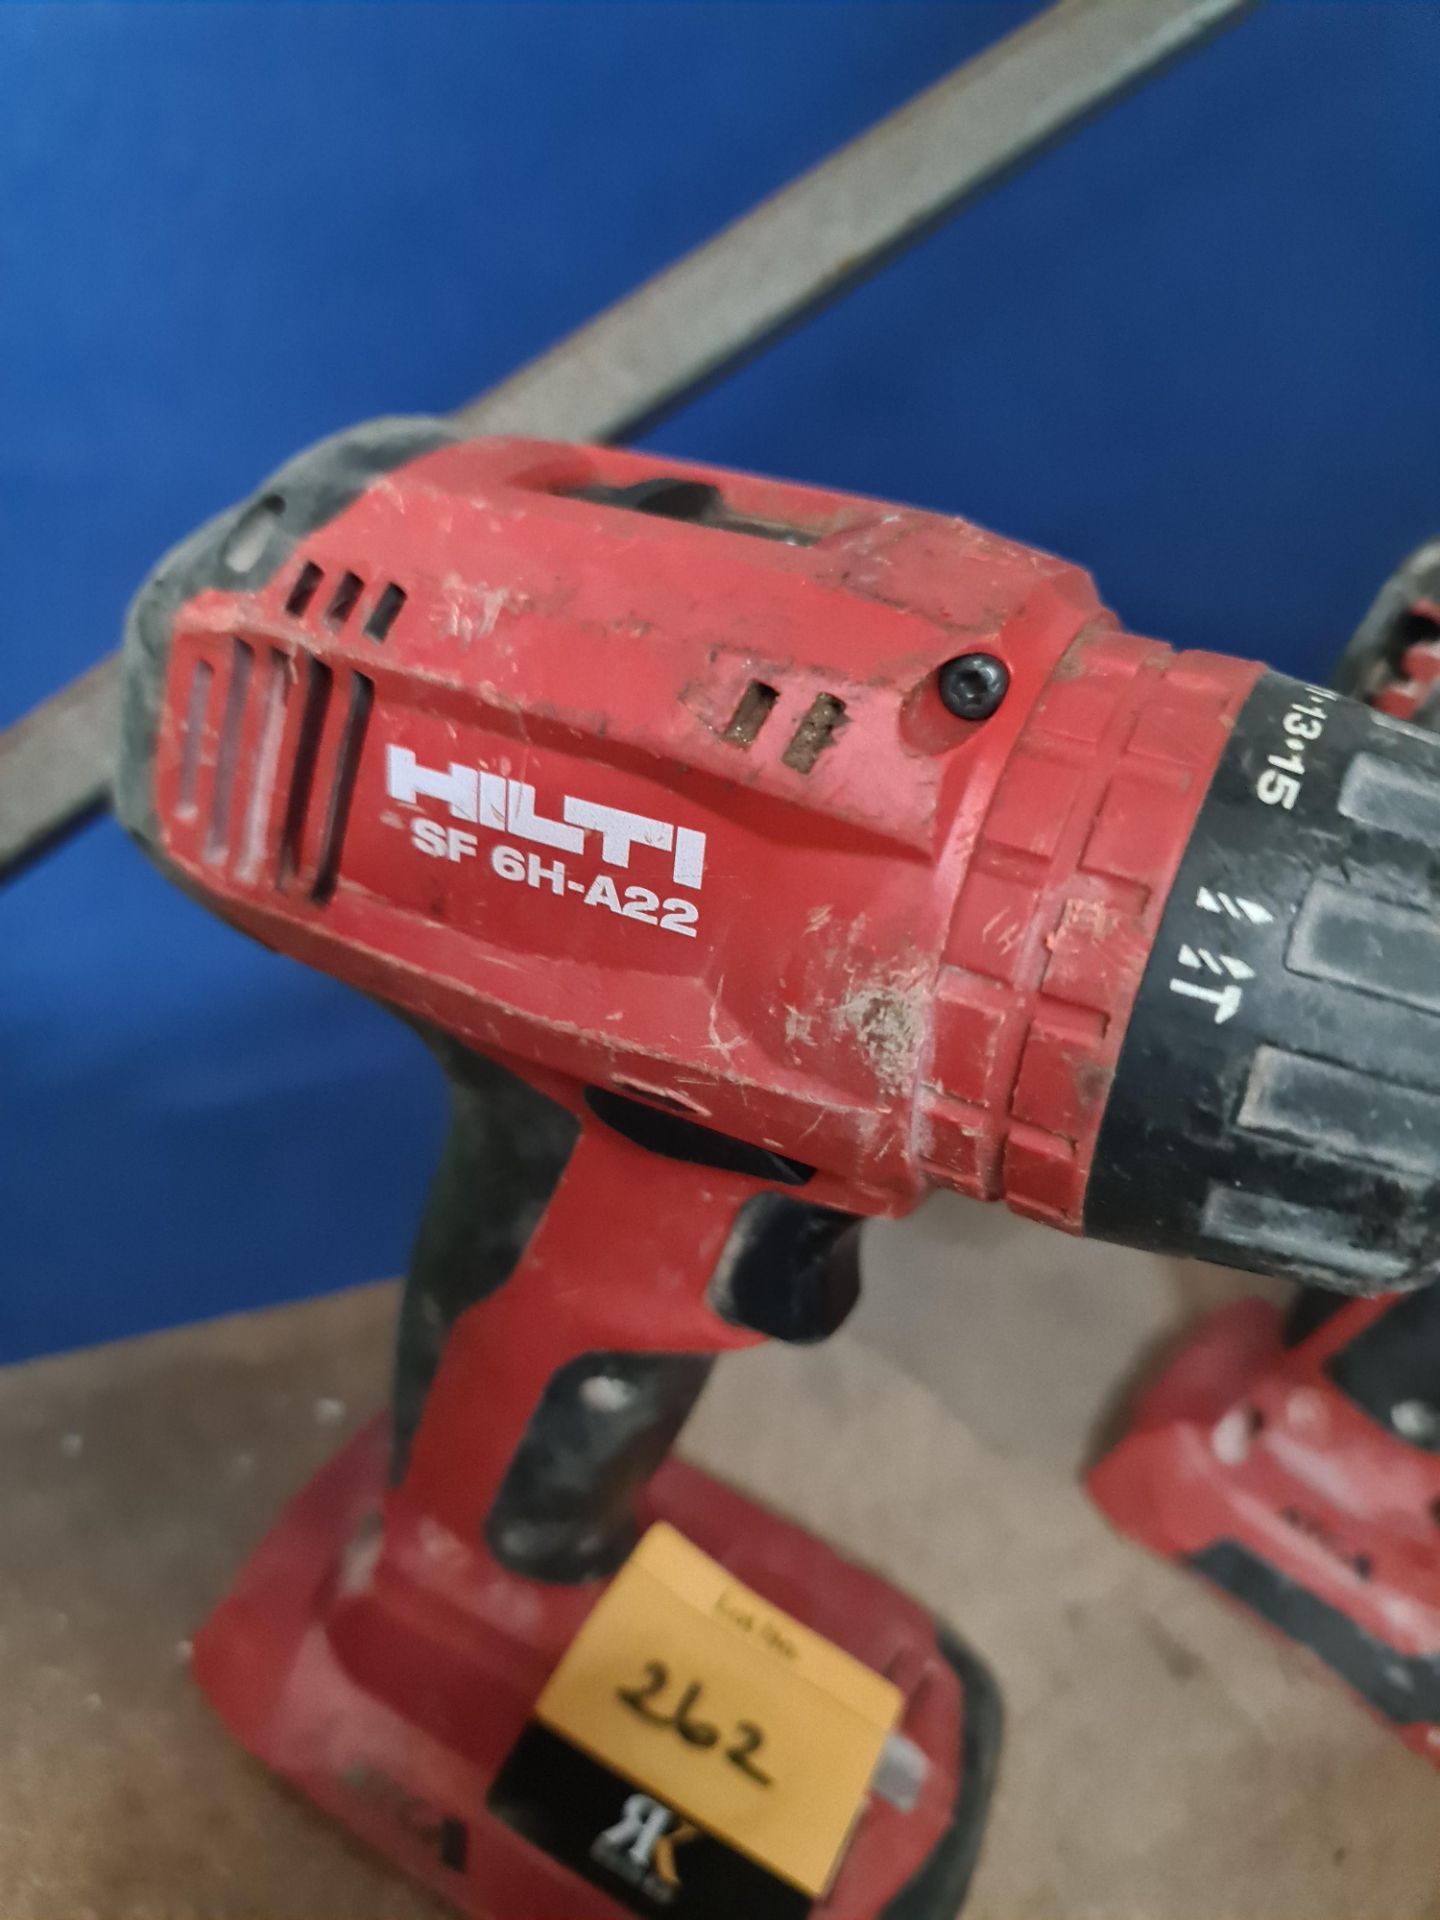 Hilti SF 6H-A22 cordless hammer drill driver - no battery - Image 2 of 5